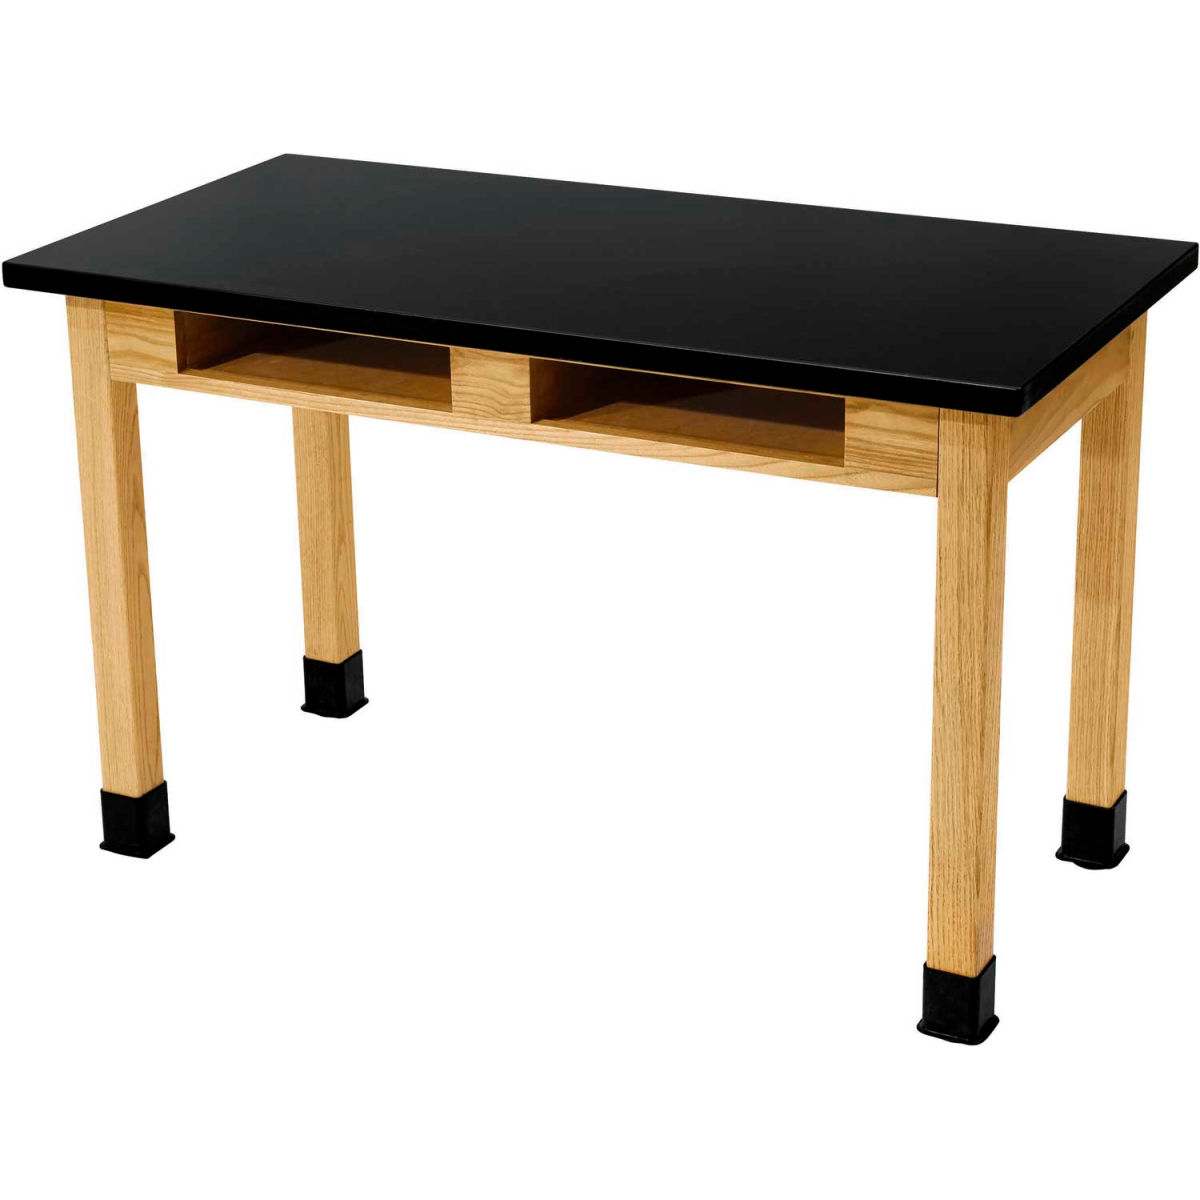 B1109971 Science Lab Table with Compartment & Chemical Resistant Top - Black with Oak Leg - 72 x 30 x 30 in -  National Public Seating